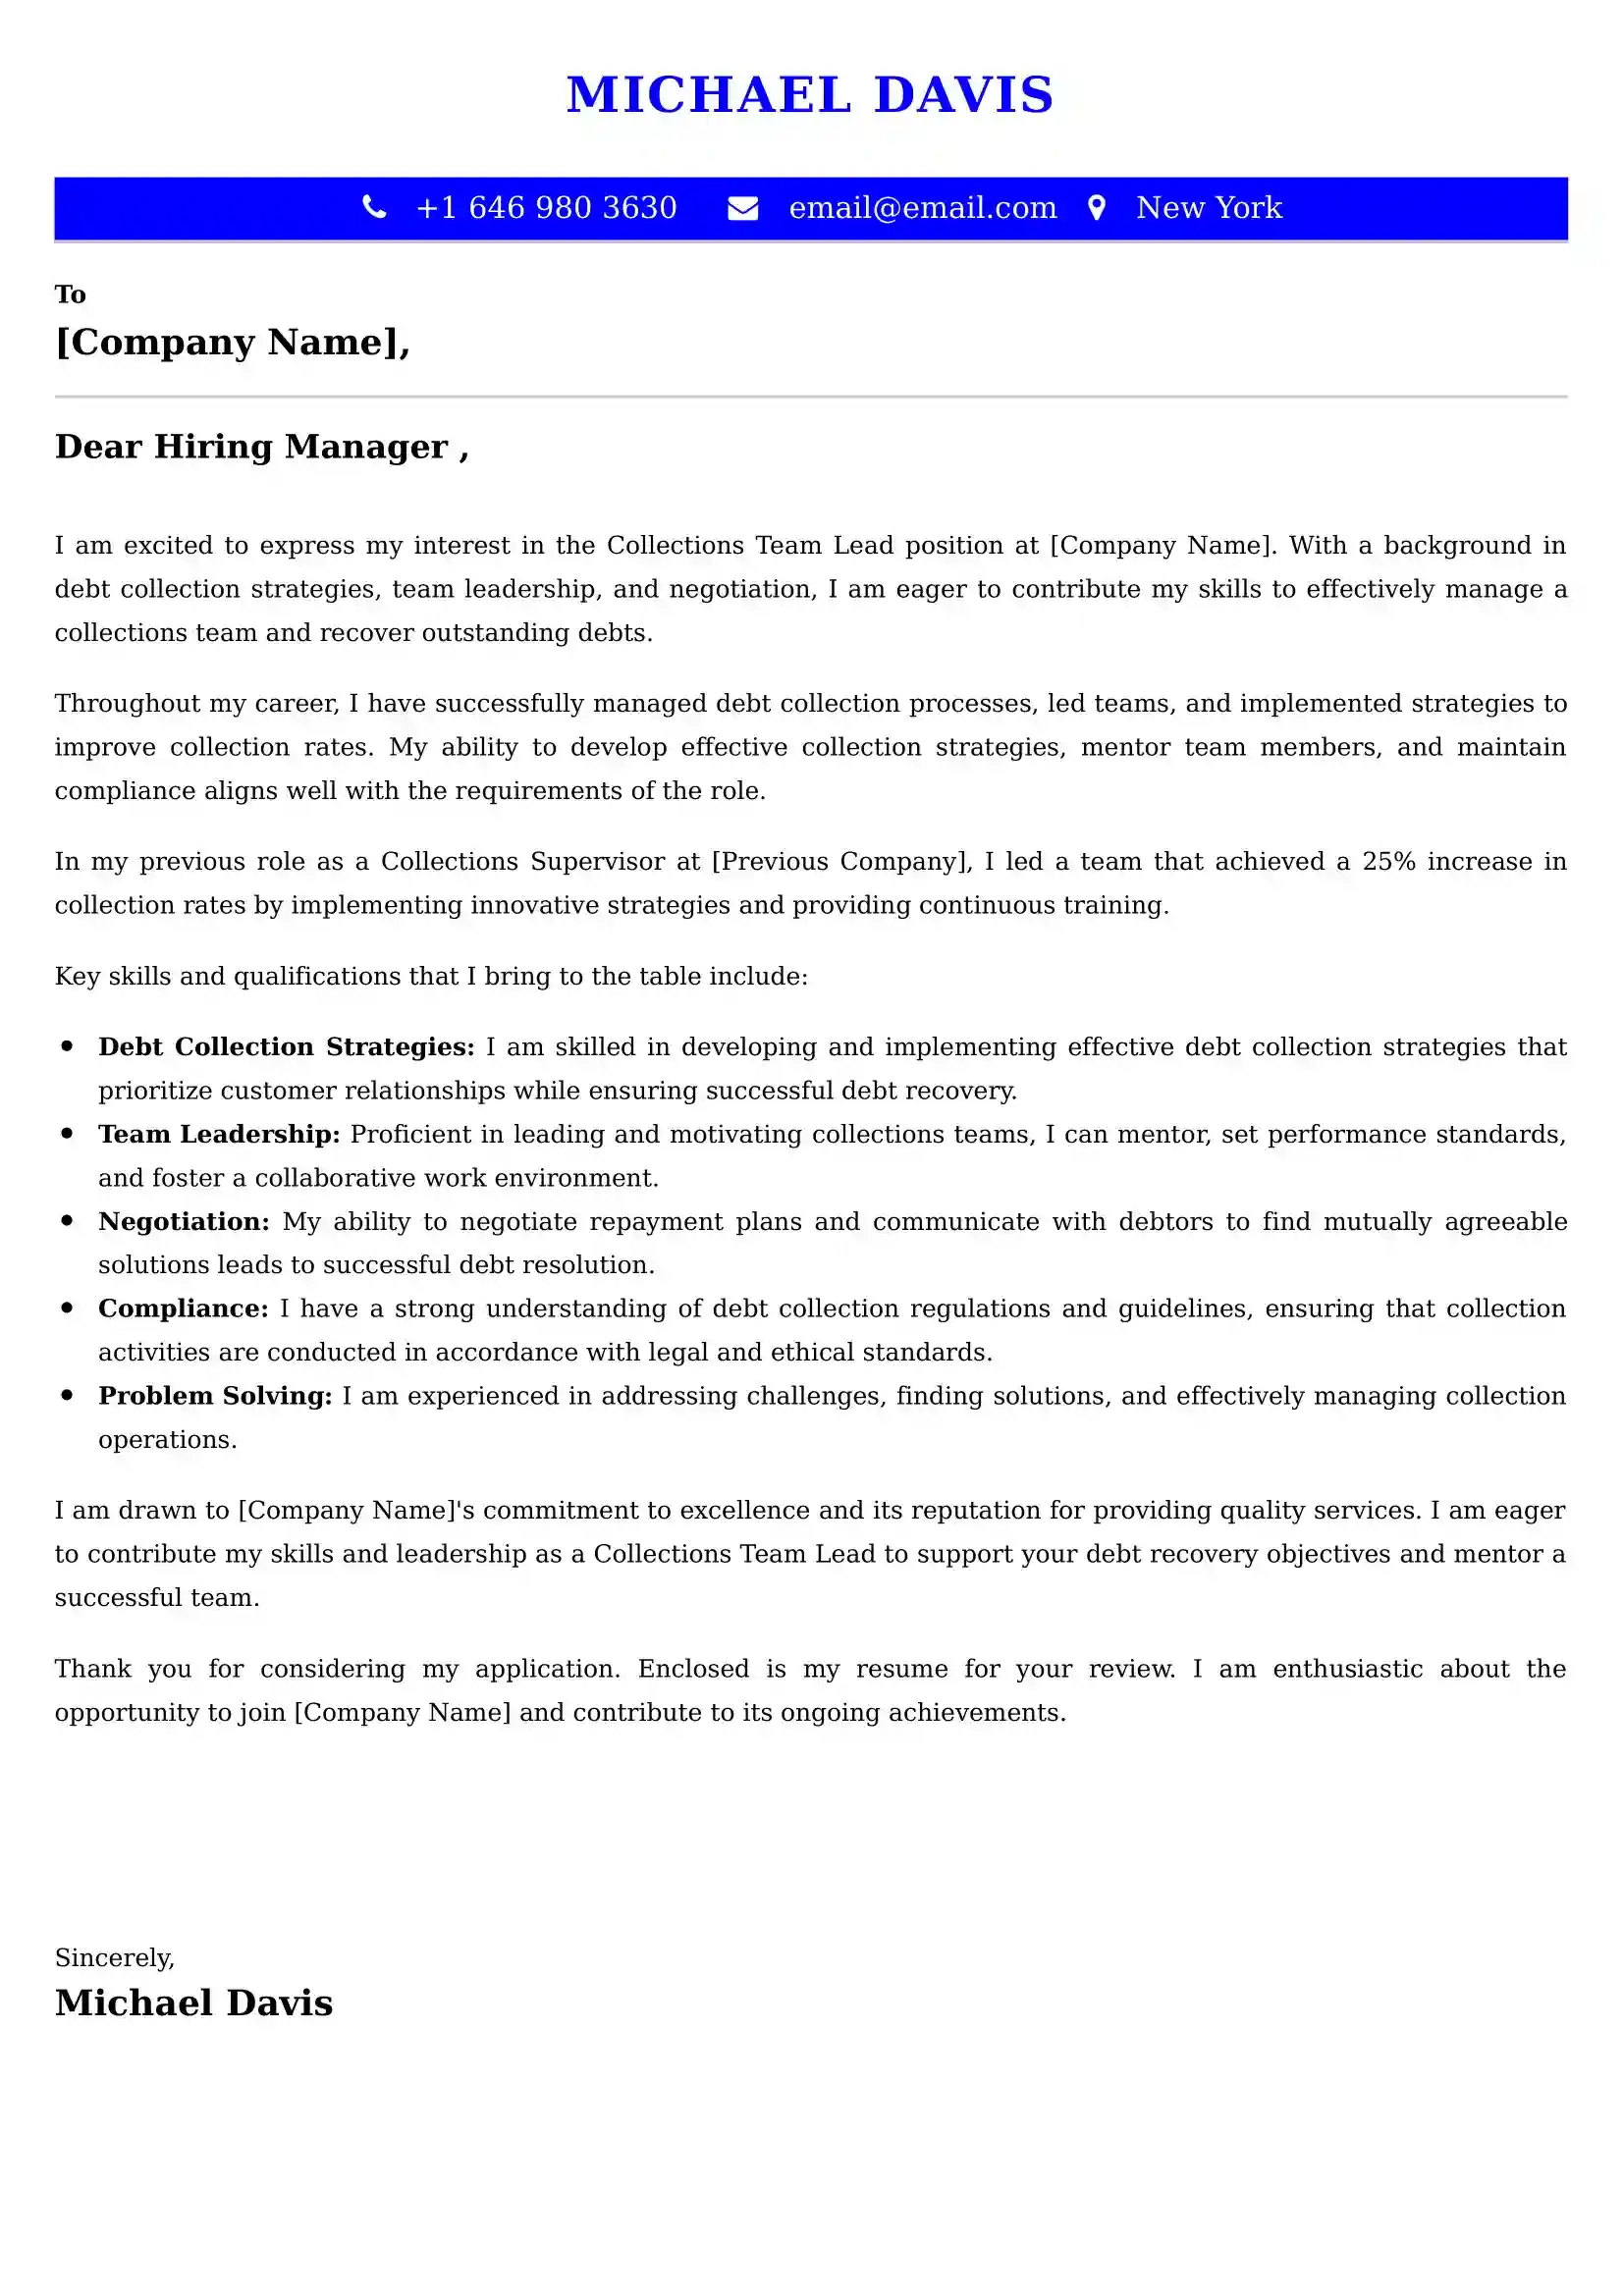 Collections Team Lead Cover Letter Examples UAE - ATS Format